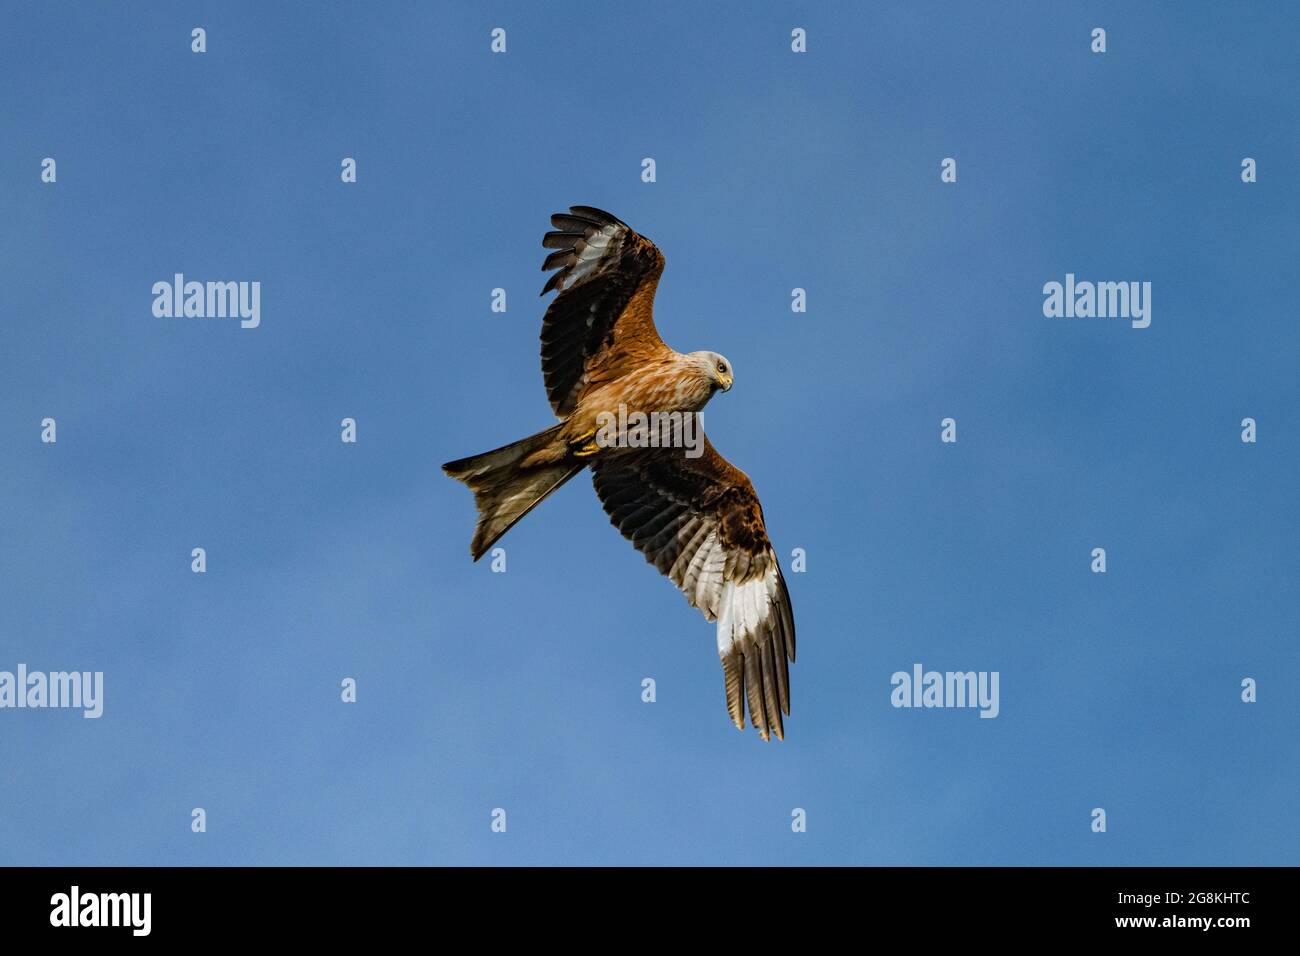 portrait of a towering red kite against blue skies Stock Photo